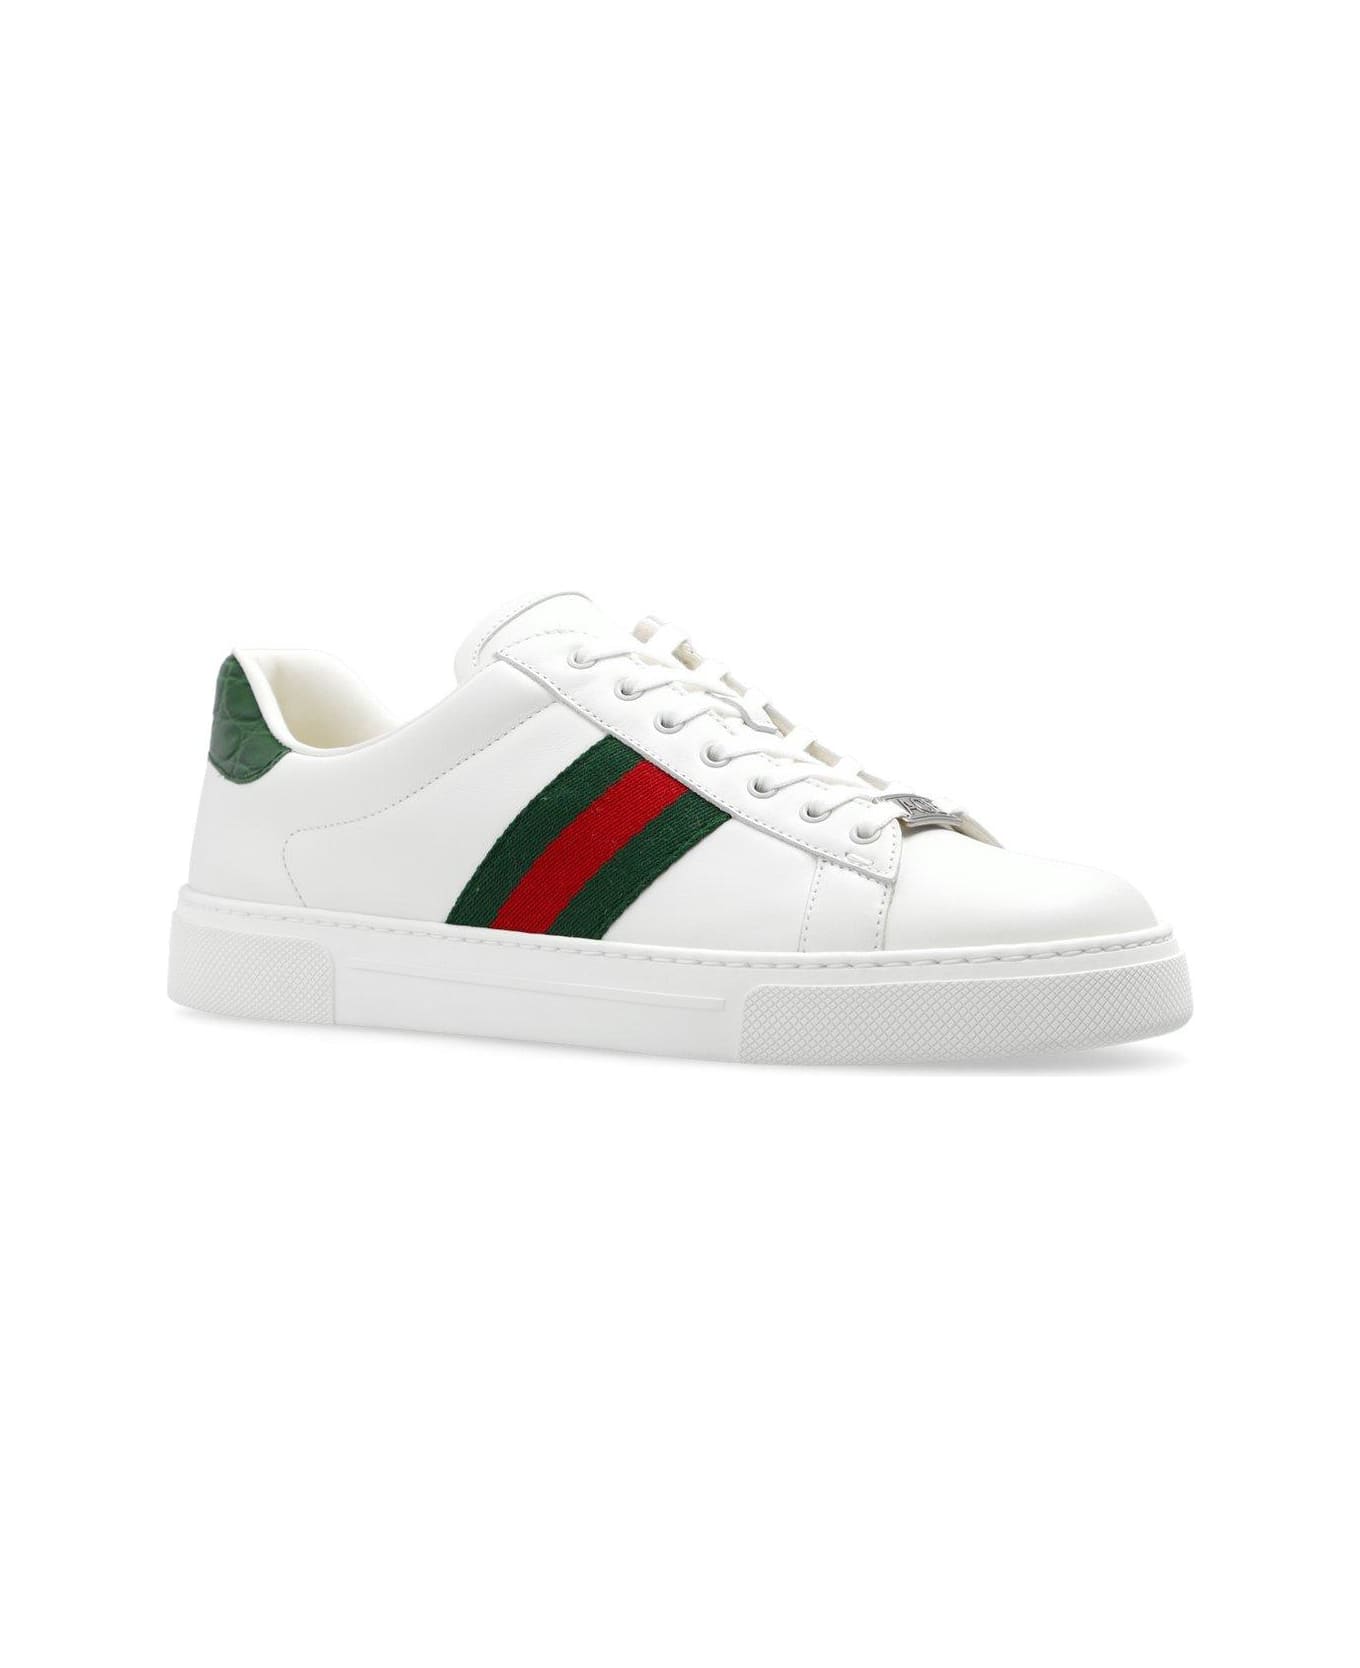 Gucci Ace Low-top Sneakers - Green Ace スニーカー